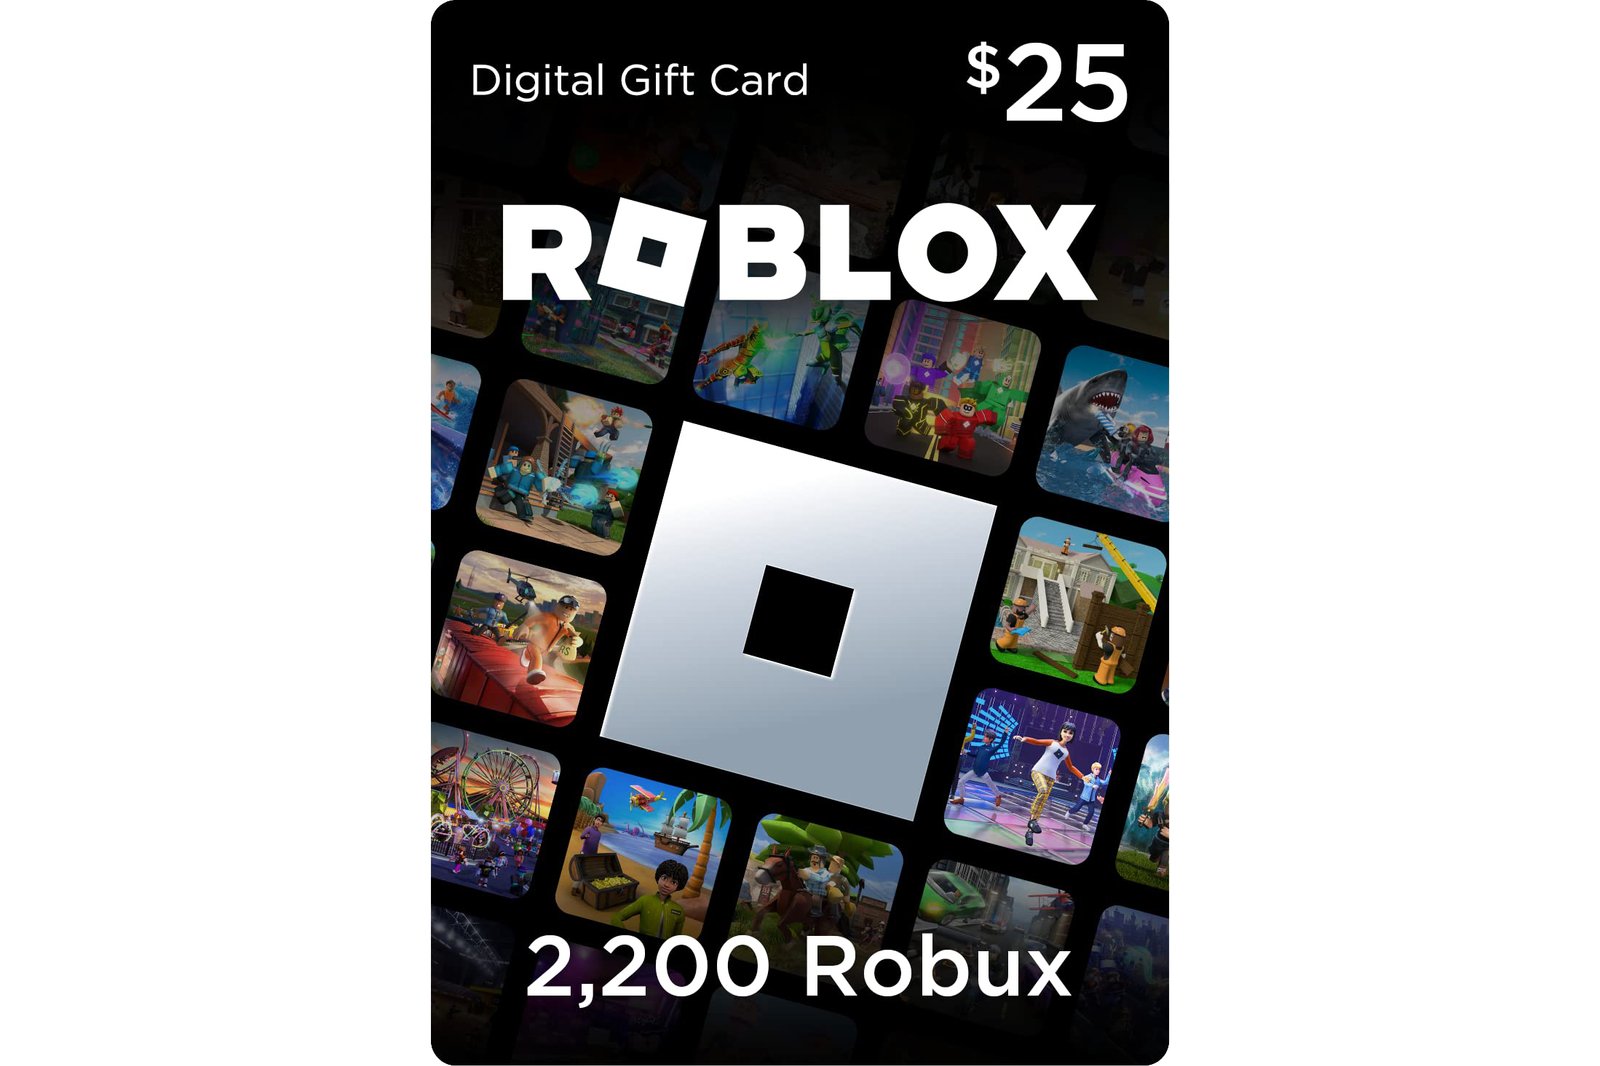 Stocking stuffer alert: Salvage 20% off Roblox reward cards for Cyber Monday